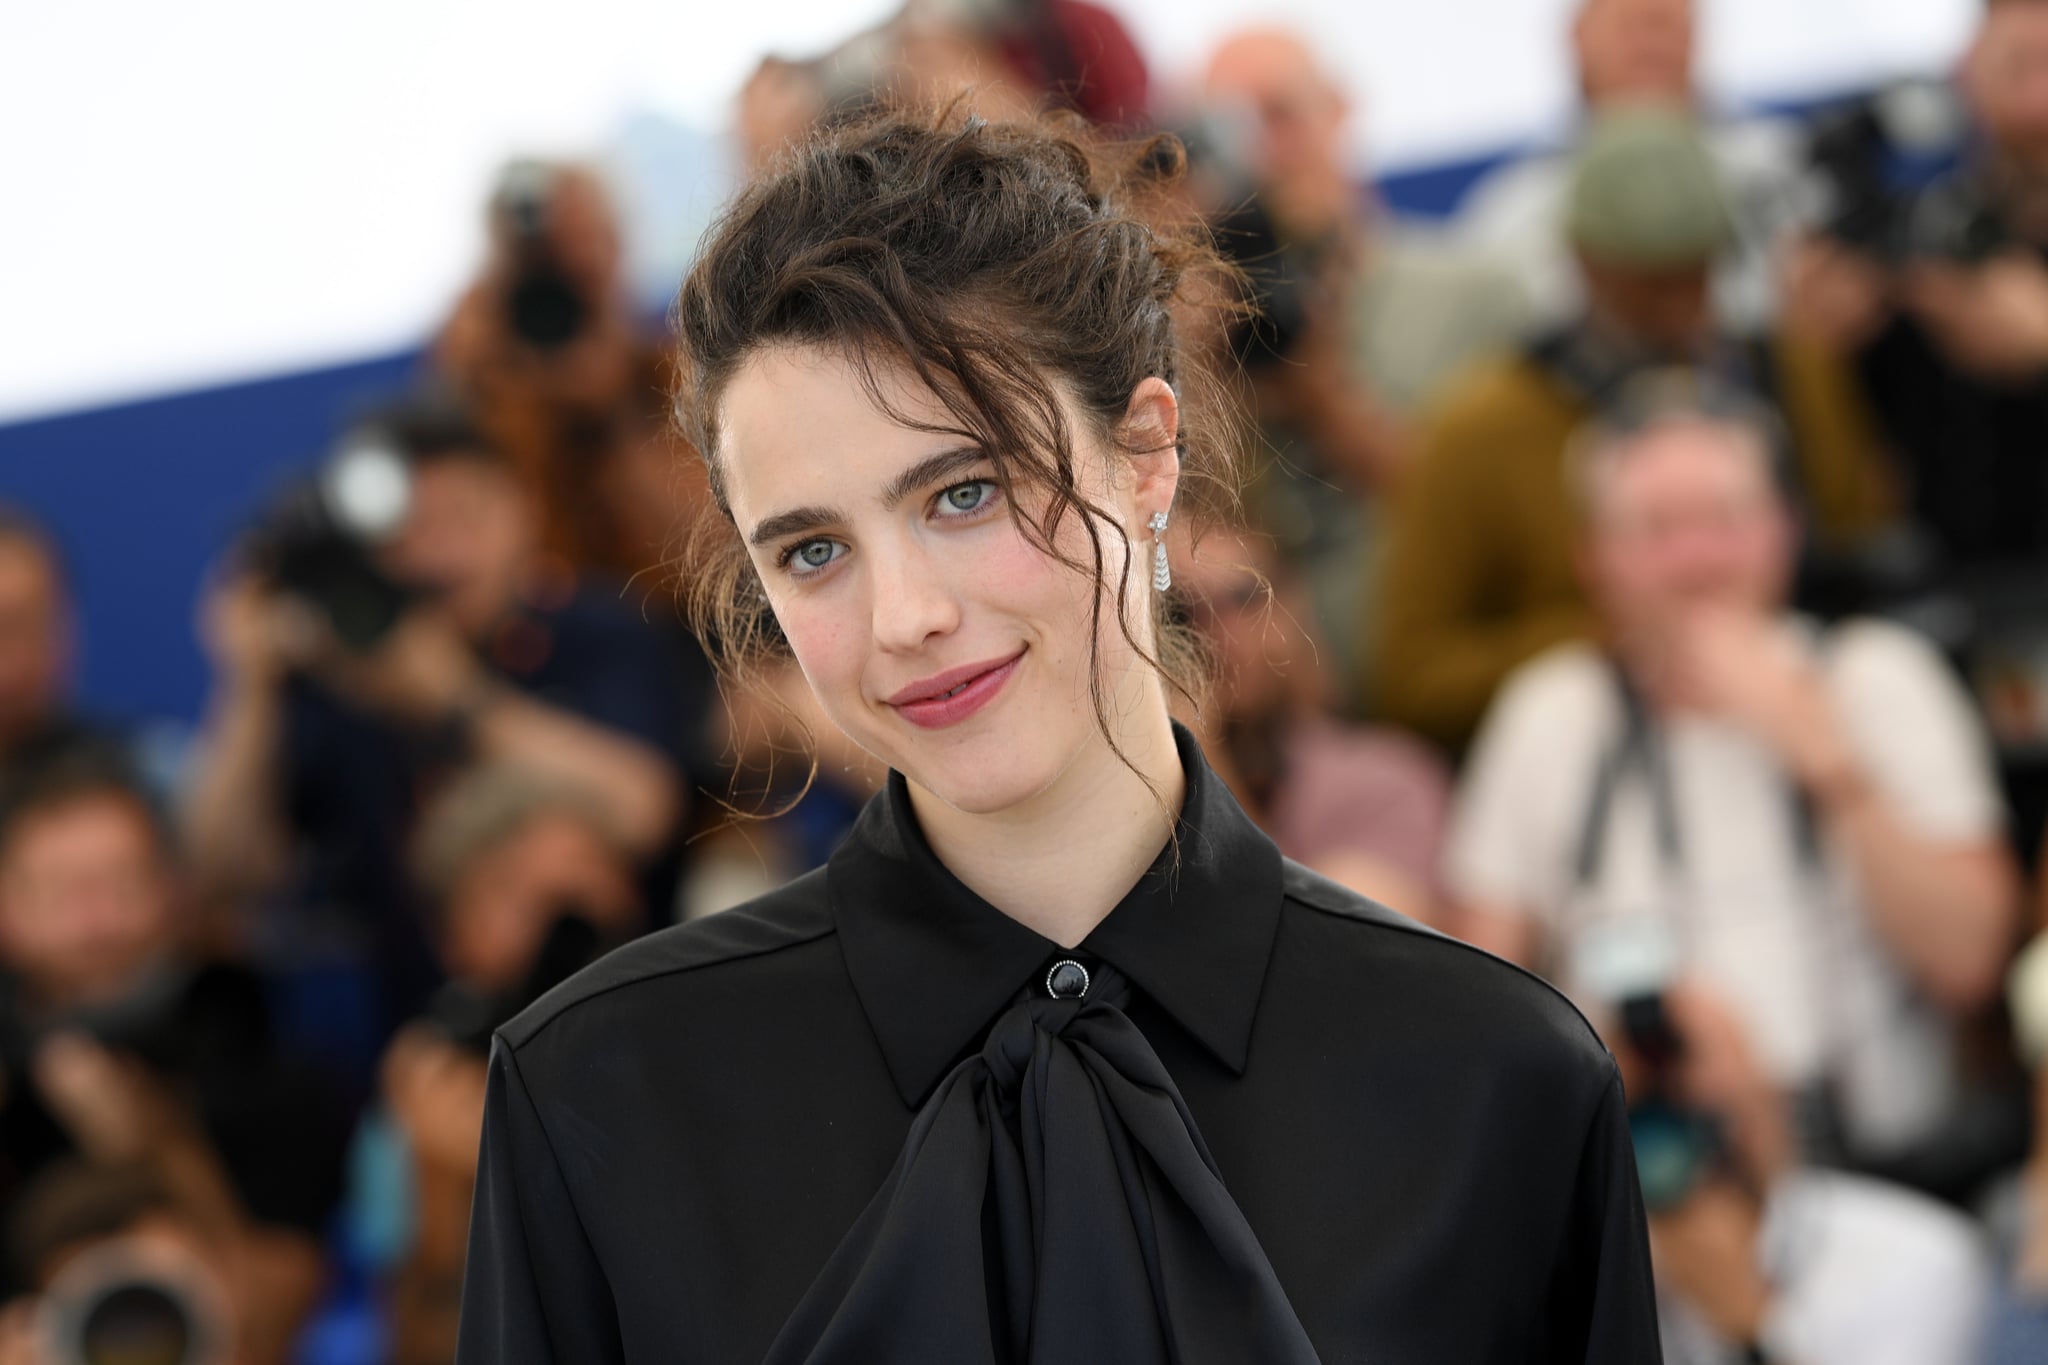 CANNES, FRANCE - MAY 26: Margaret Qualley attends the photocall for 